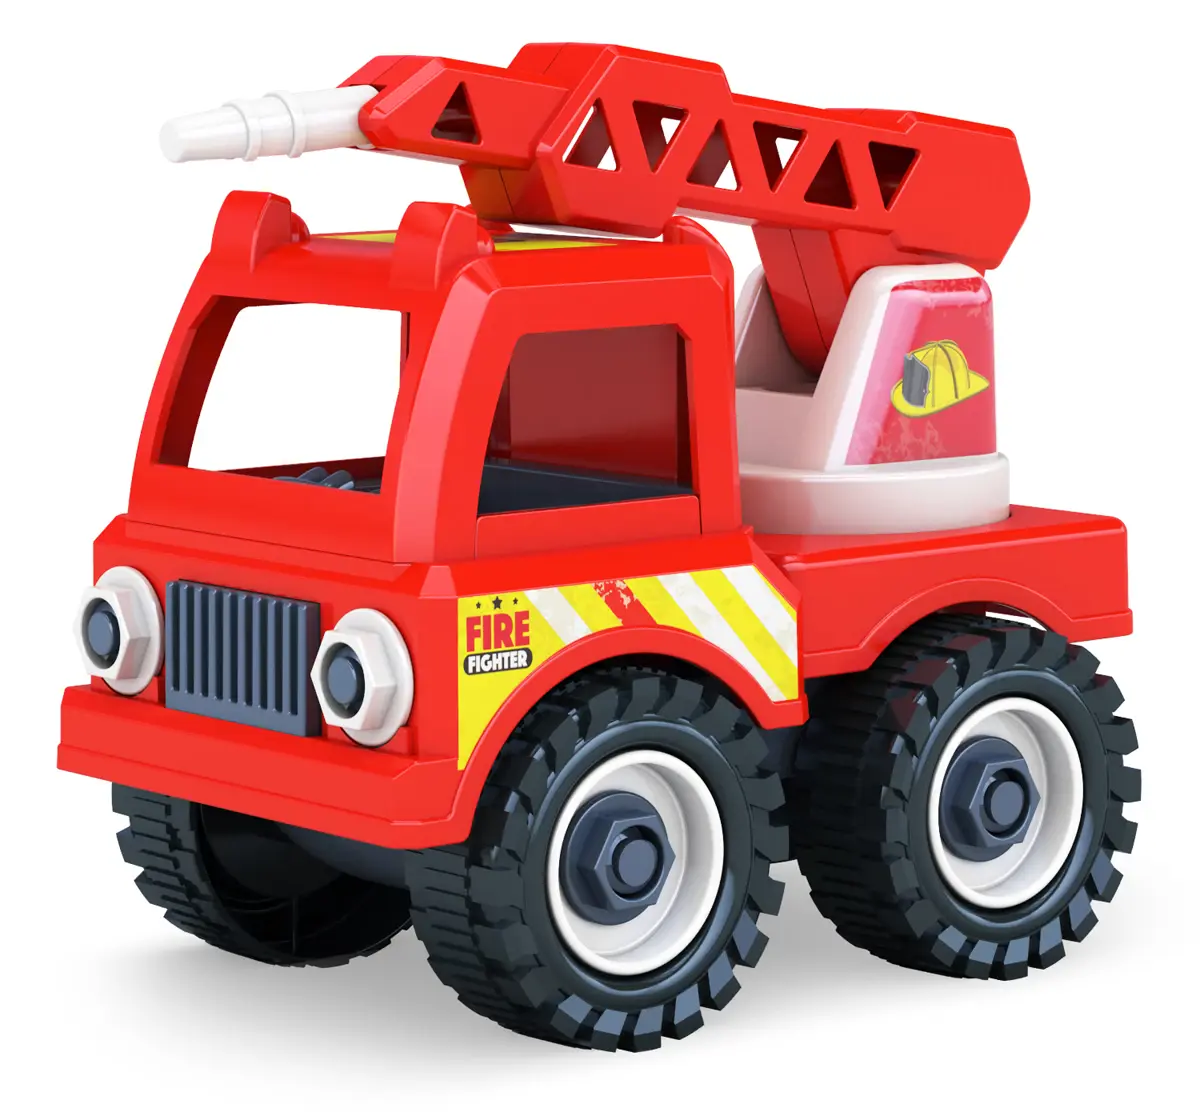 Mighty Machines Aerial Fire Truck Construction Vechile for kids 3Y+, Multicolour